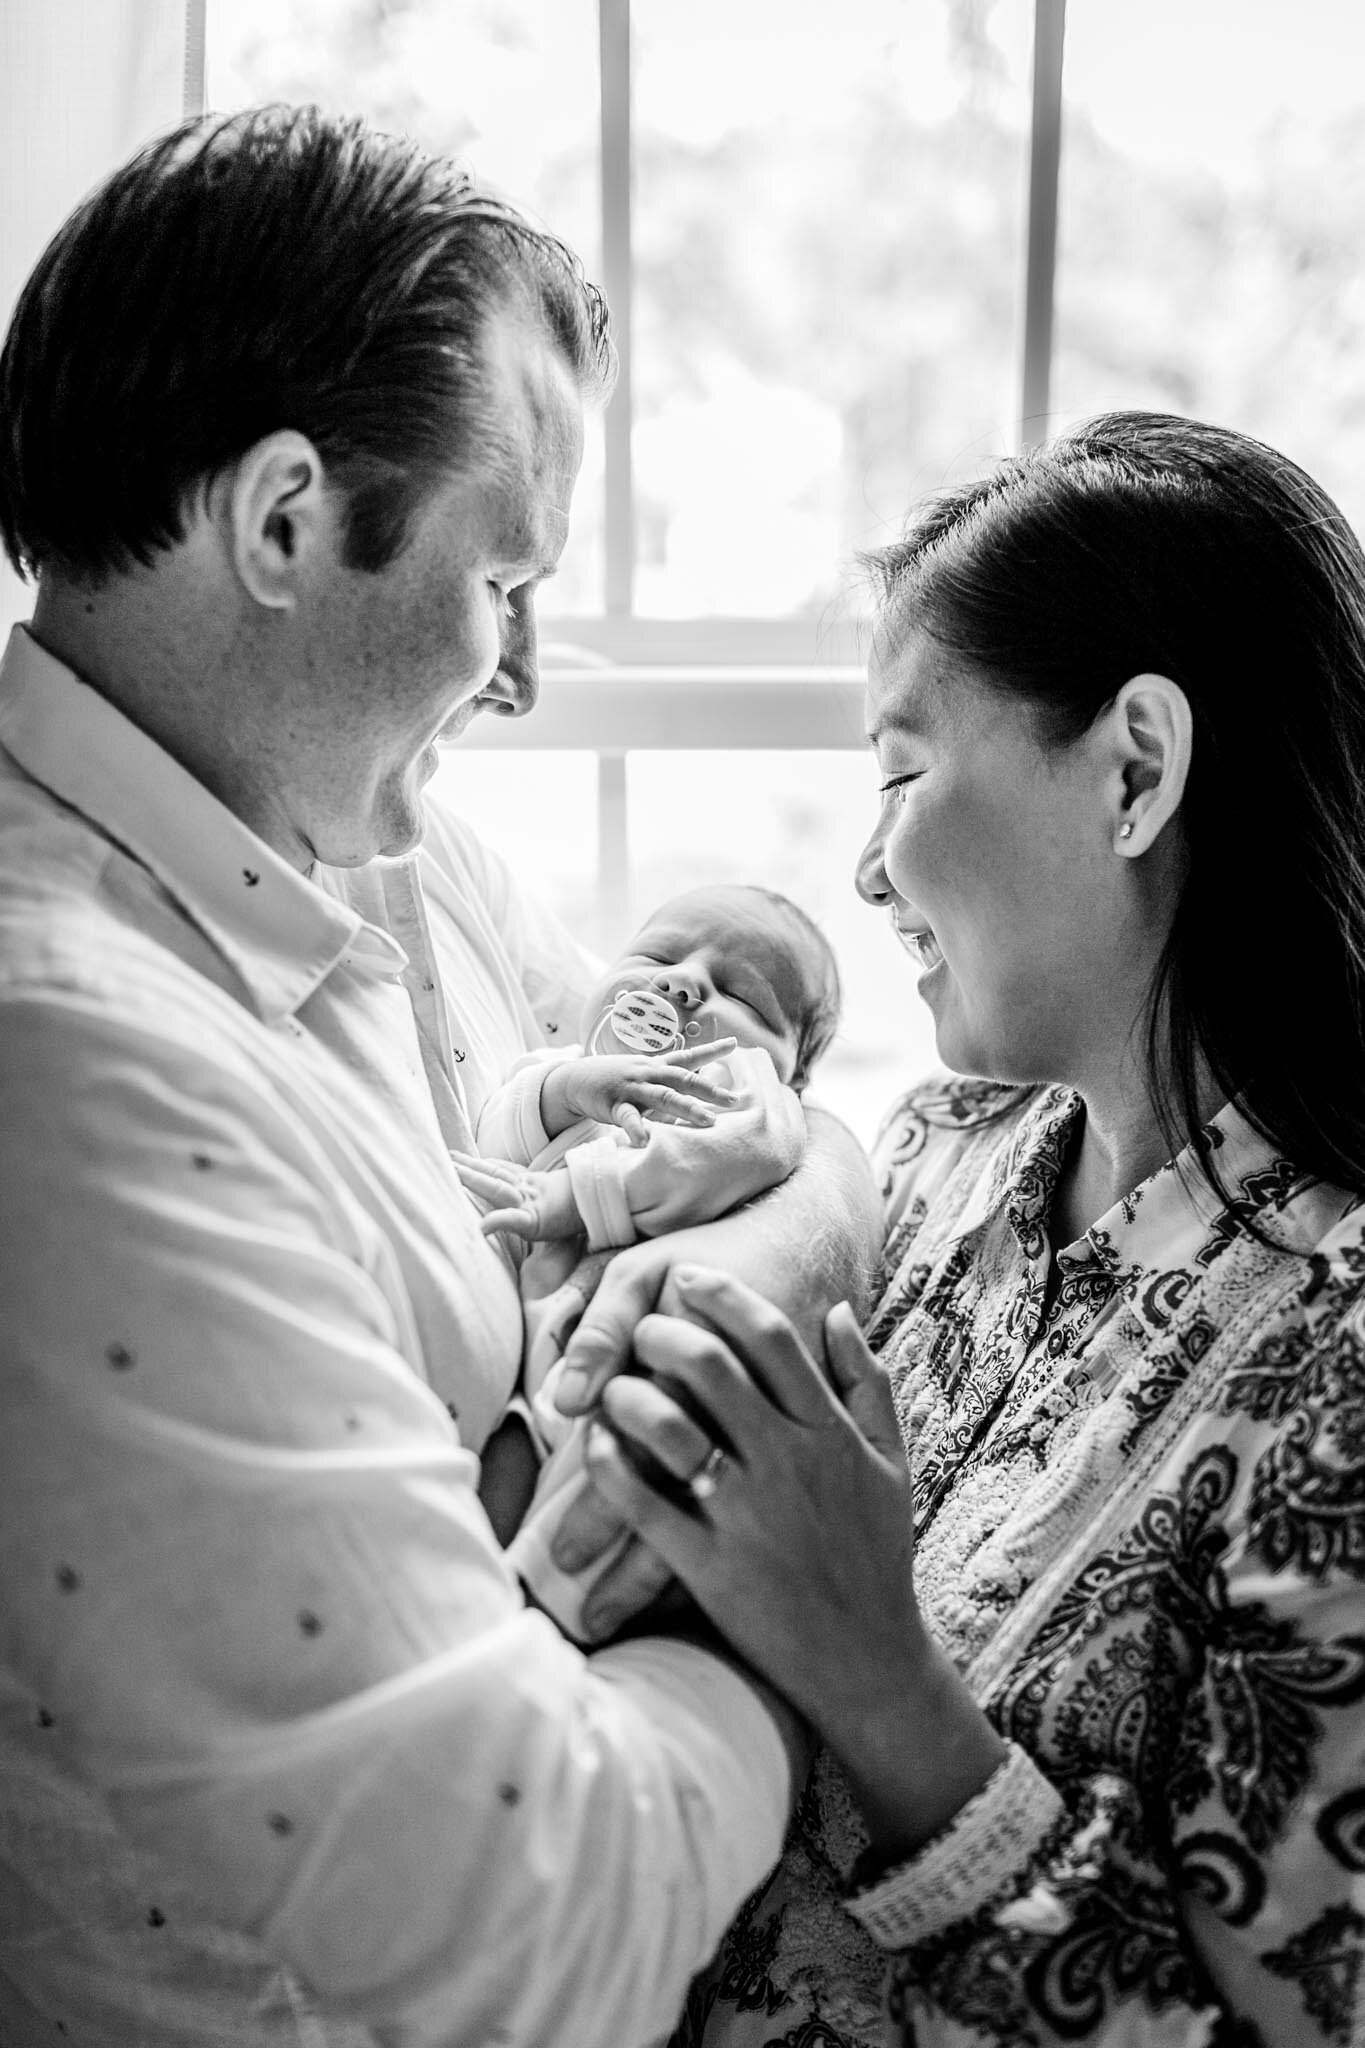 Pittsboro Newborn Photographer | By G. Lin Photography | Black and white photo of parents holding baby by window